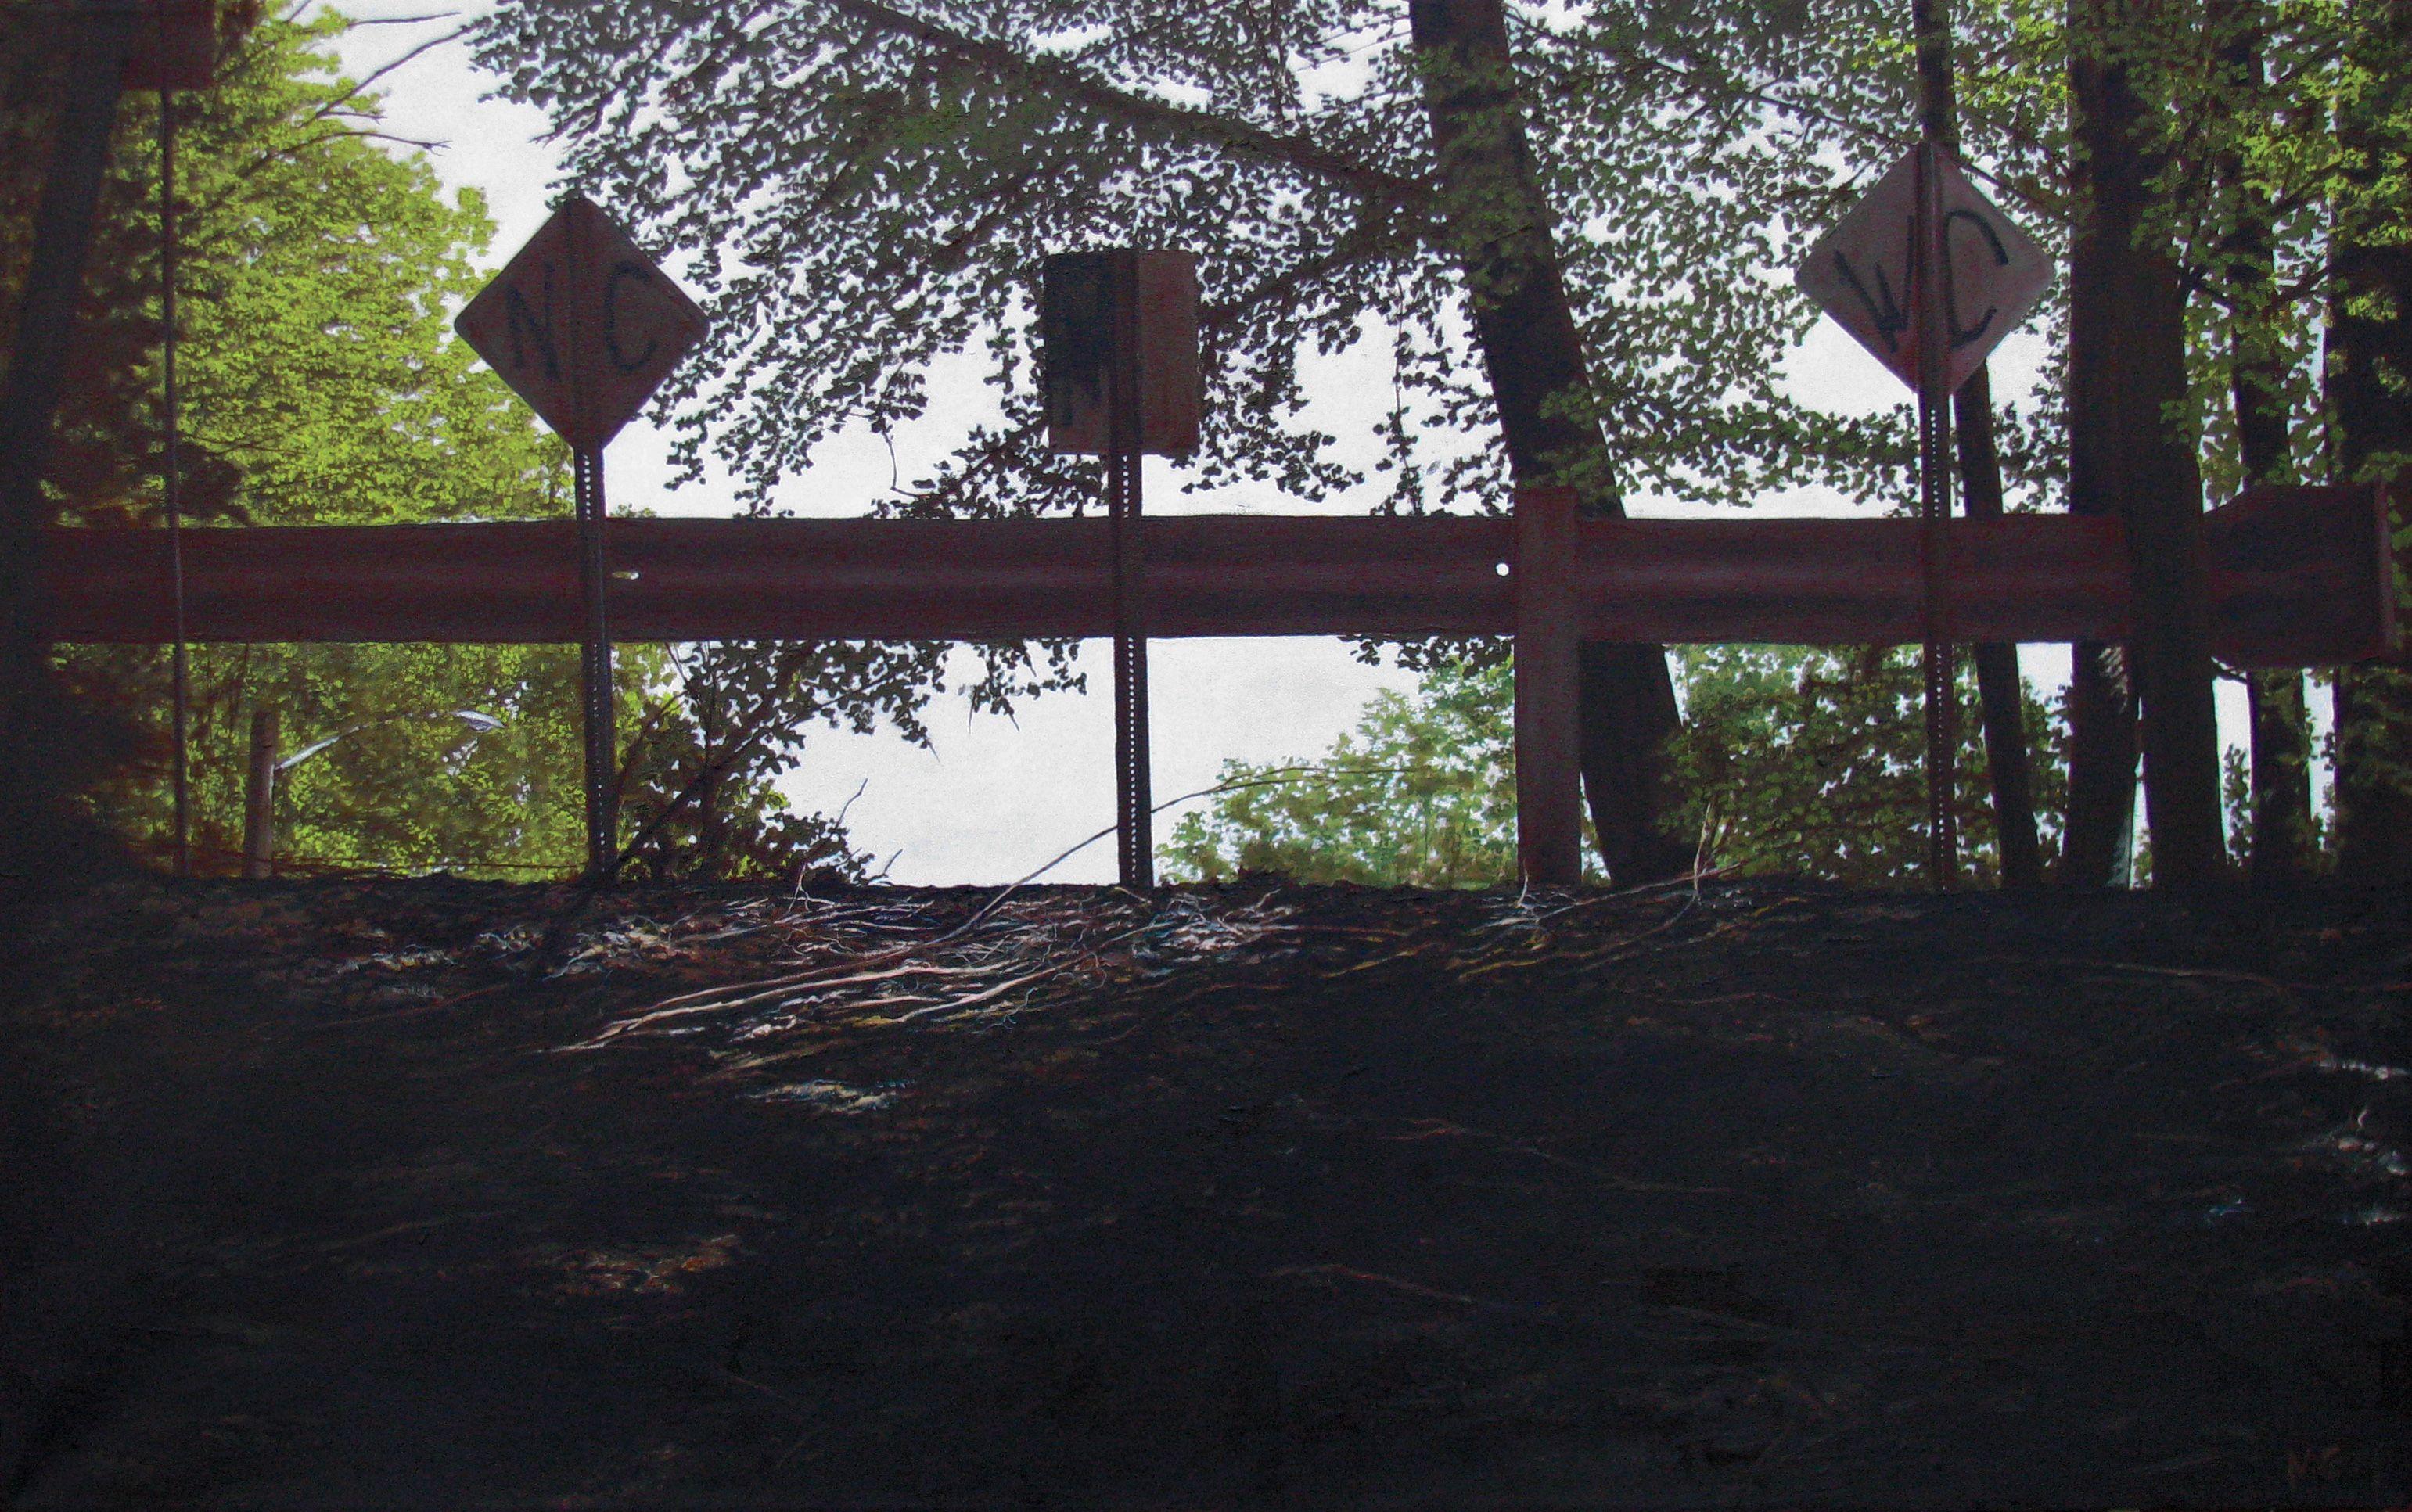 A roadside guardrail interrupts a hike in the park. Sunlight fills one side, and fallen branches are kept in the shadows on the other side.    This painting is part of a study of suburban New Jersey and the many unexpected places to be found among